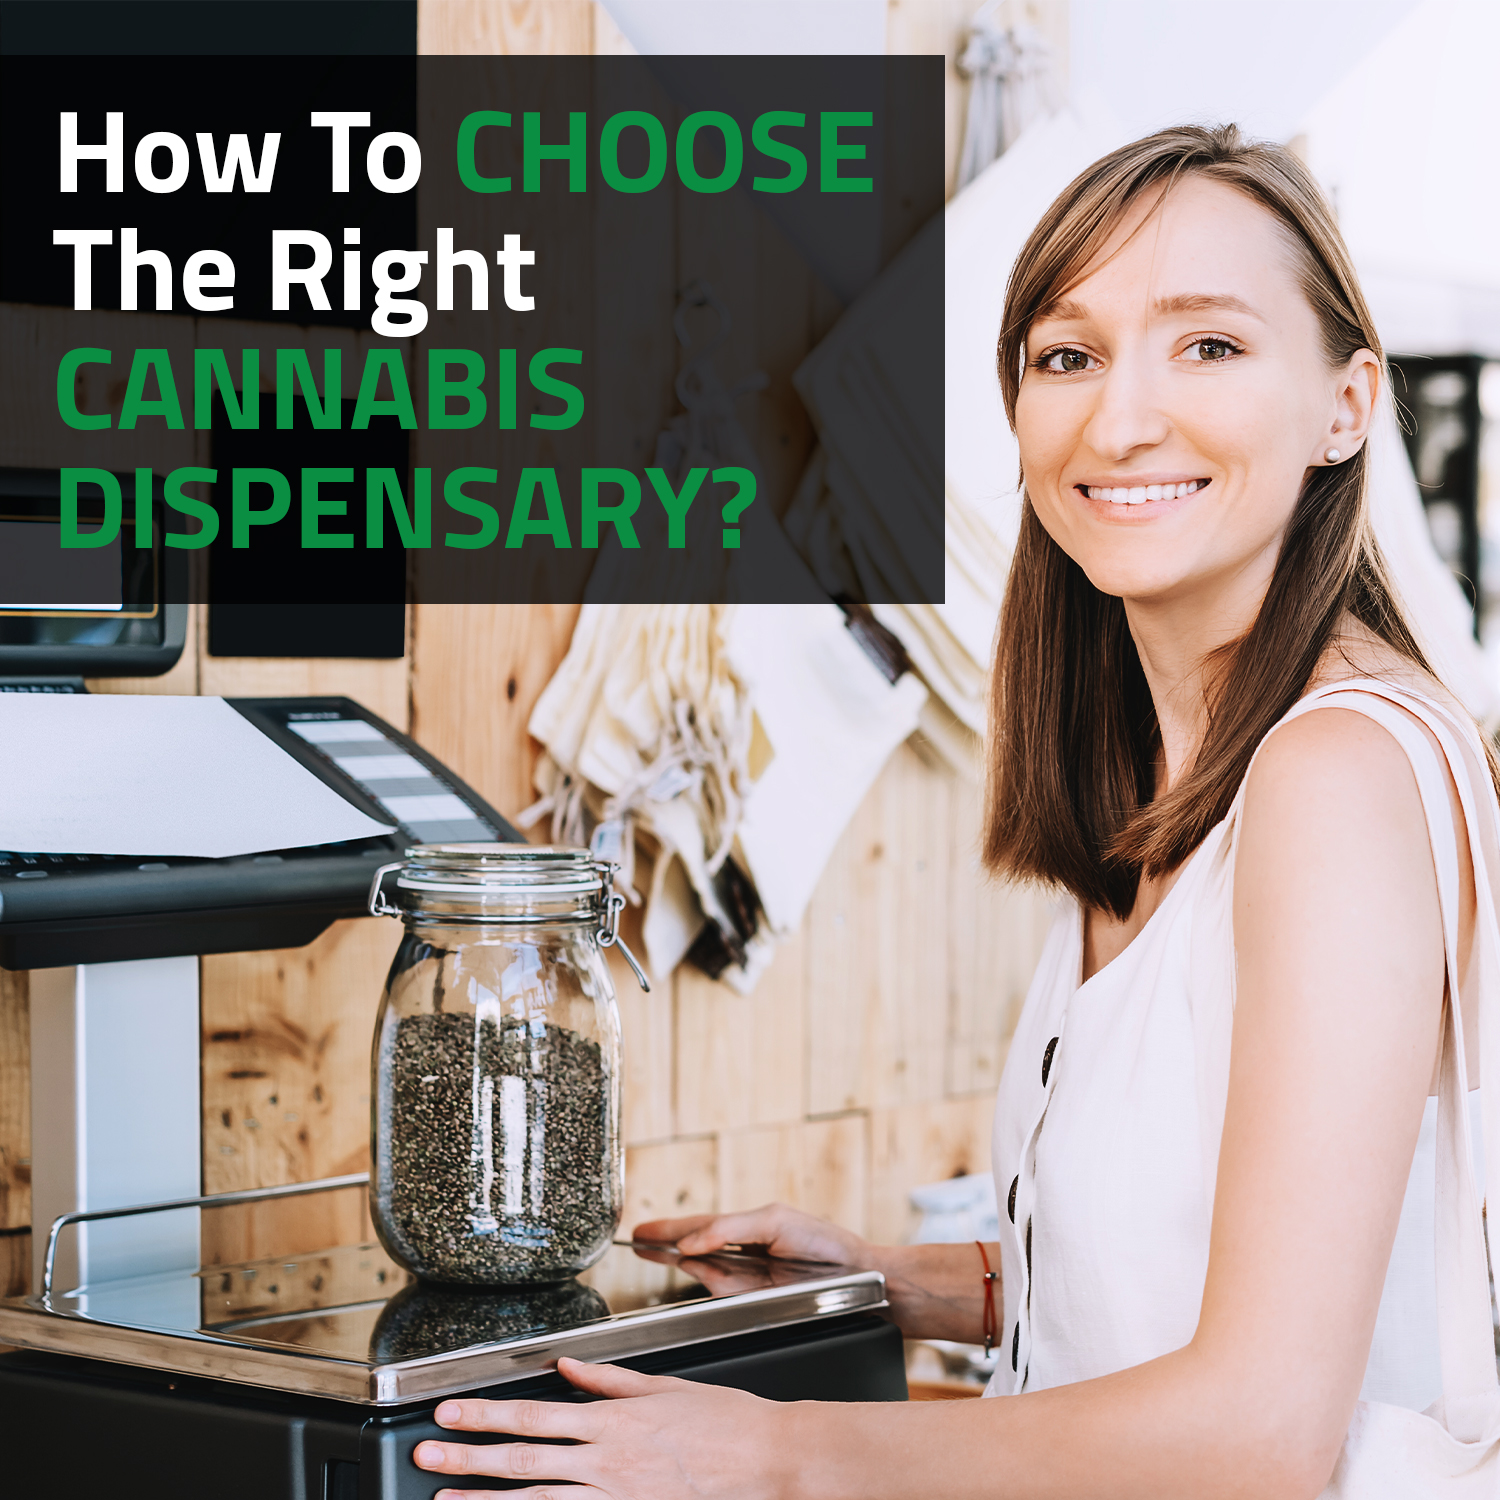 How To Choose The Right Cannabis Dispensary